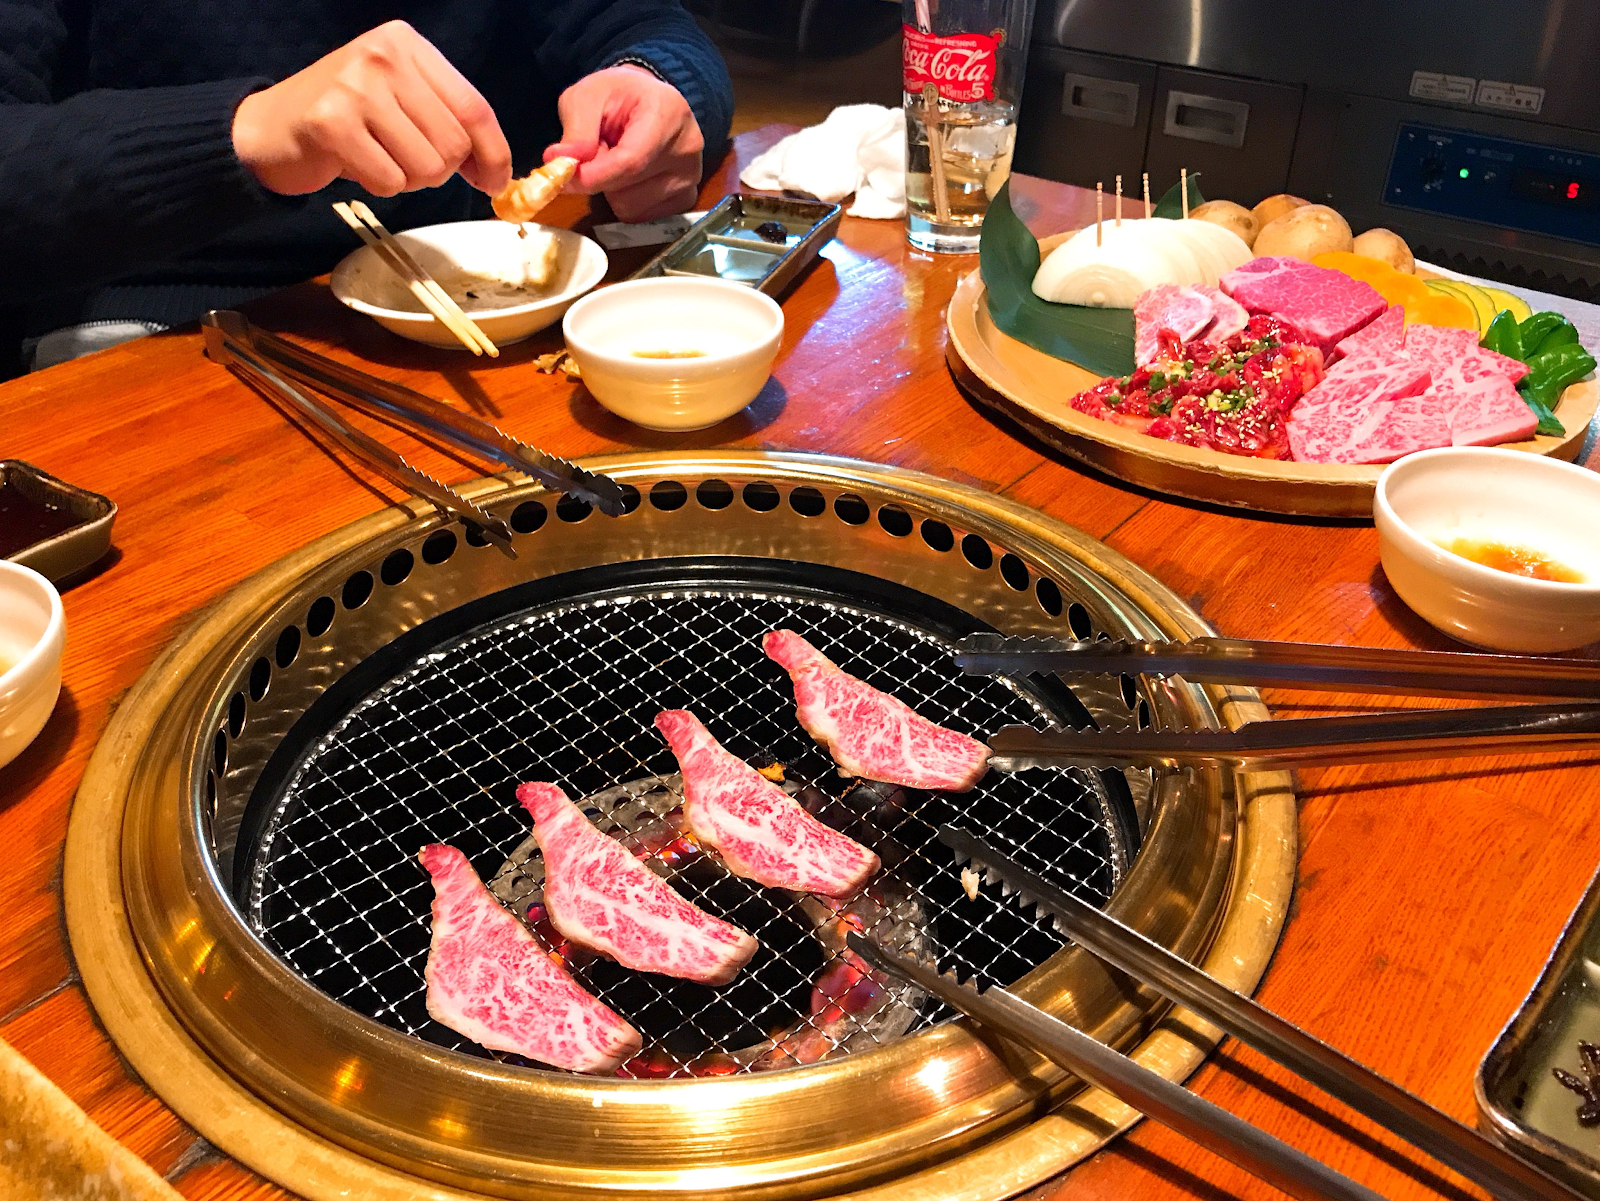 How to Discover and Experience Yakiniku in Japan